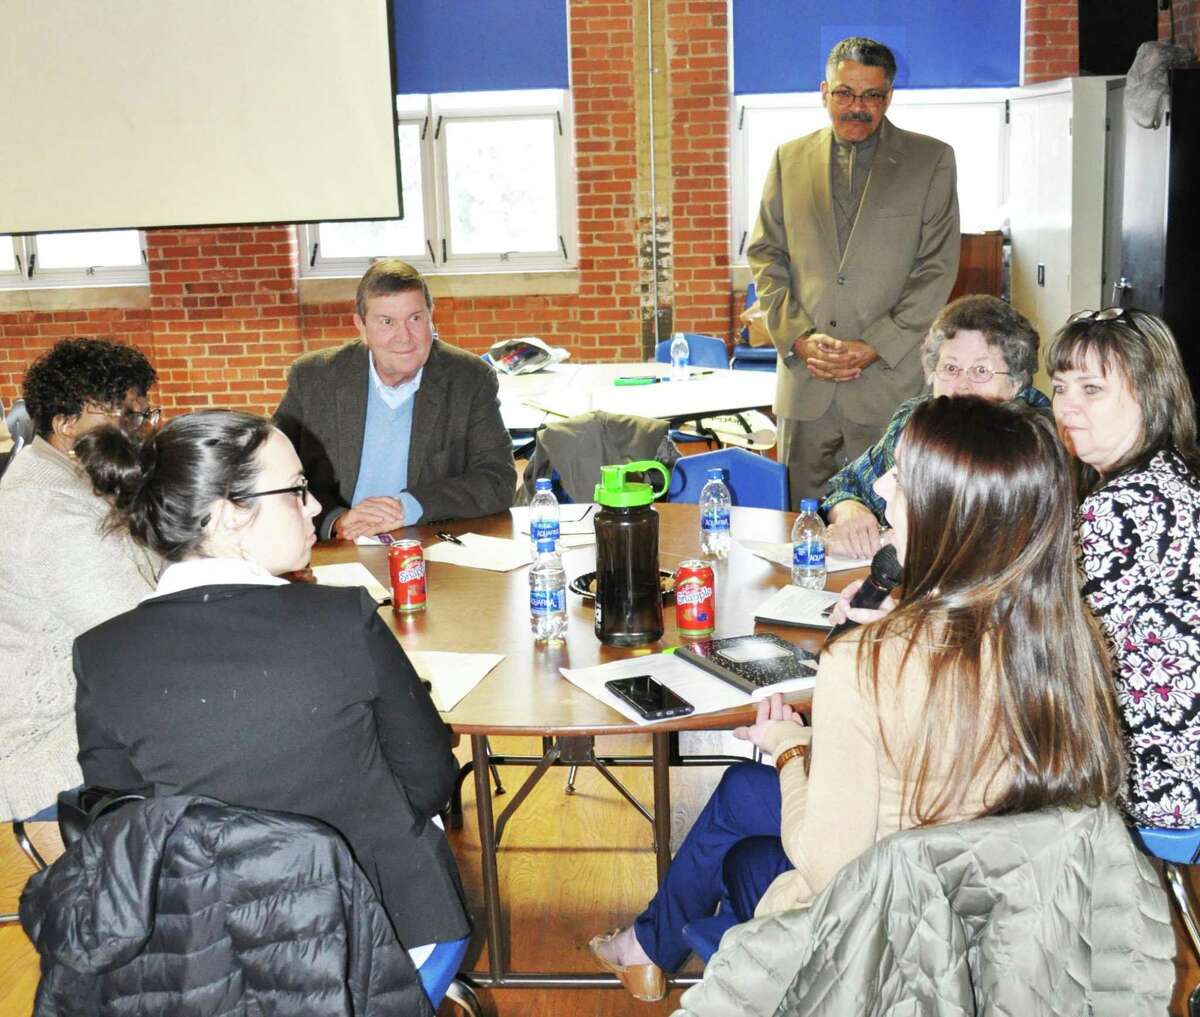 State Rep. Kara Rochelle listens as Melissa Boneski, a Bridgeport kindergarten teacher, proposes a professional development day dealing with students and trauma in Ansonia’s school system during the April 4 ,2019 Equity in Education discussion at the Boys and Girls Club in Ansonia..